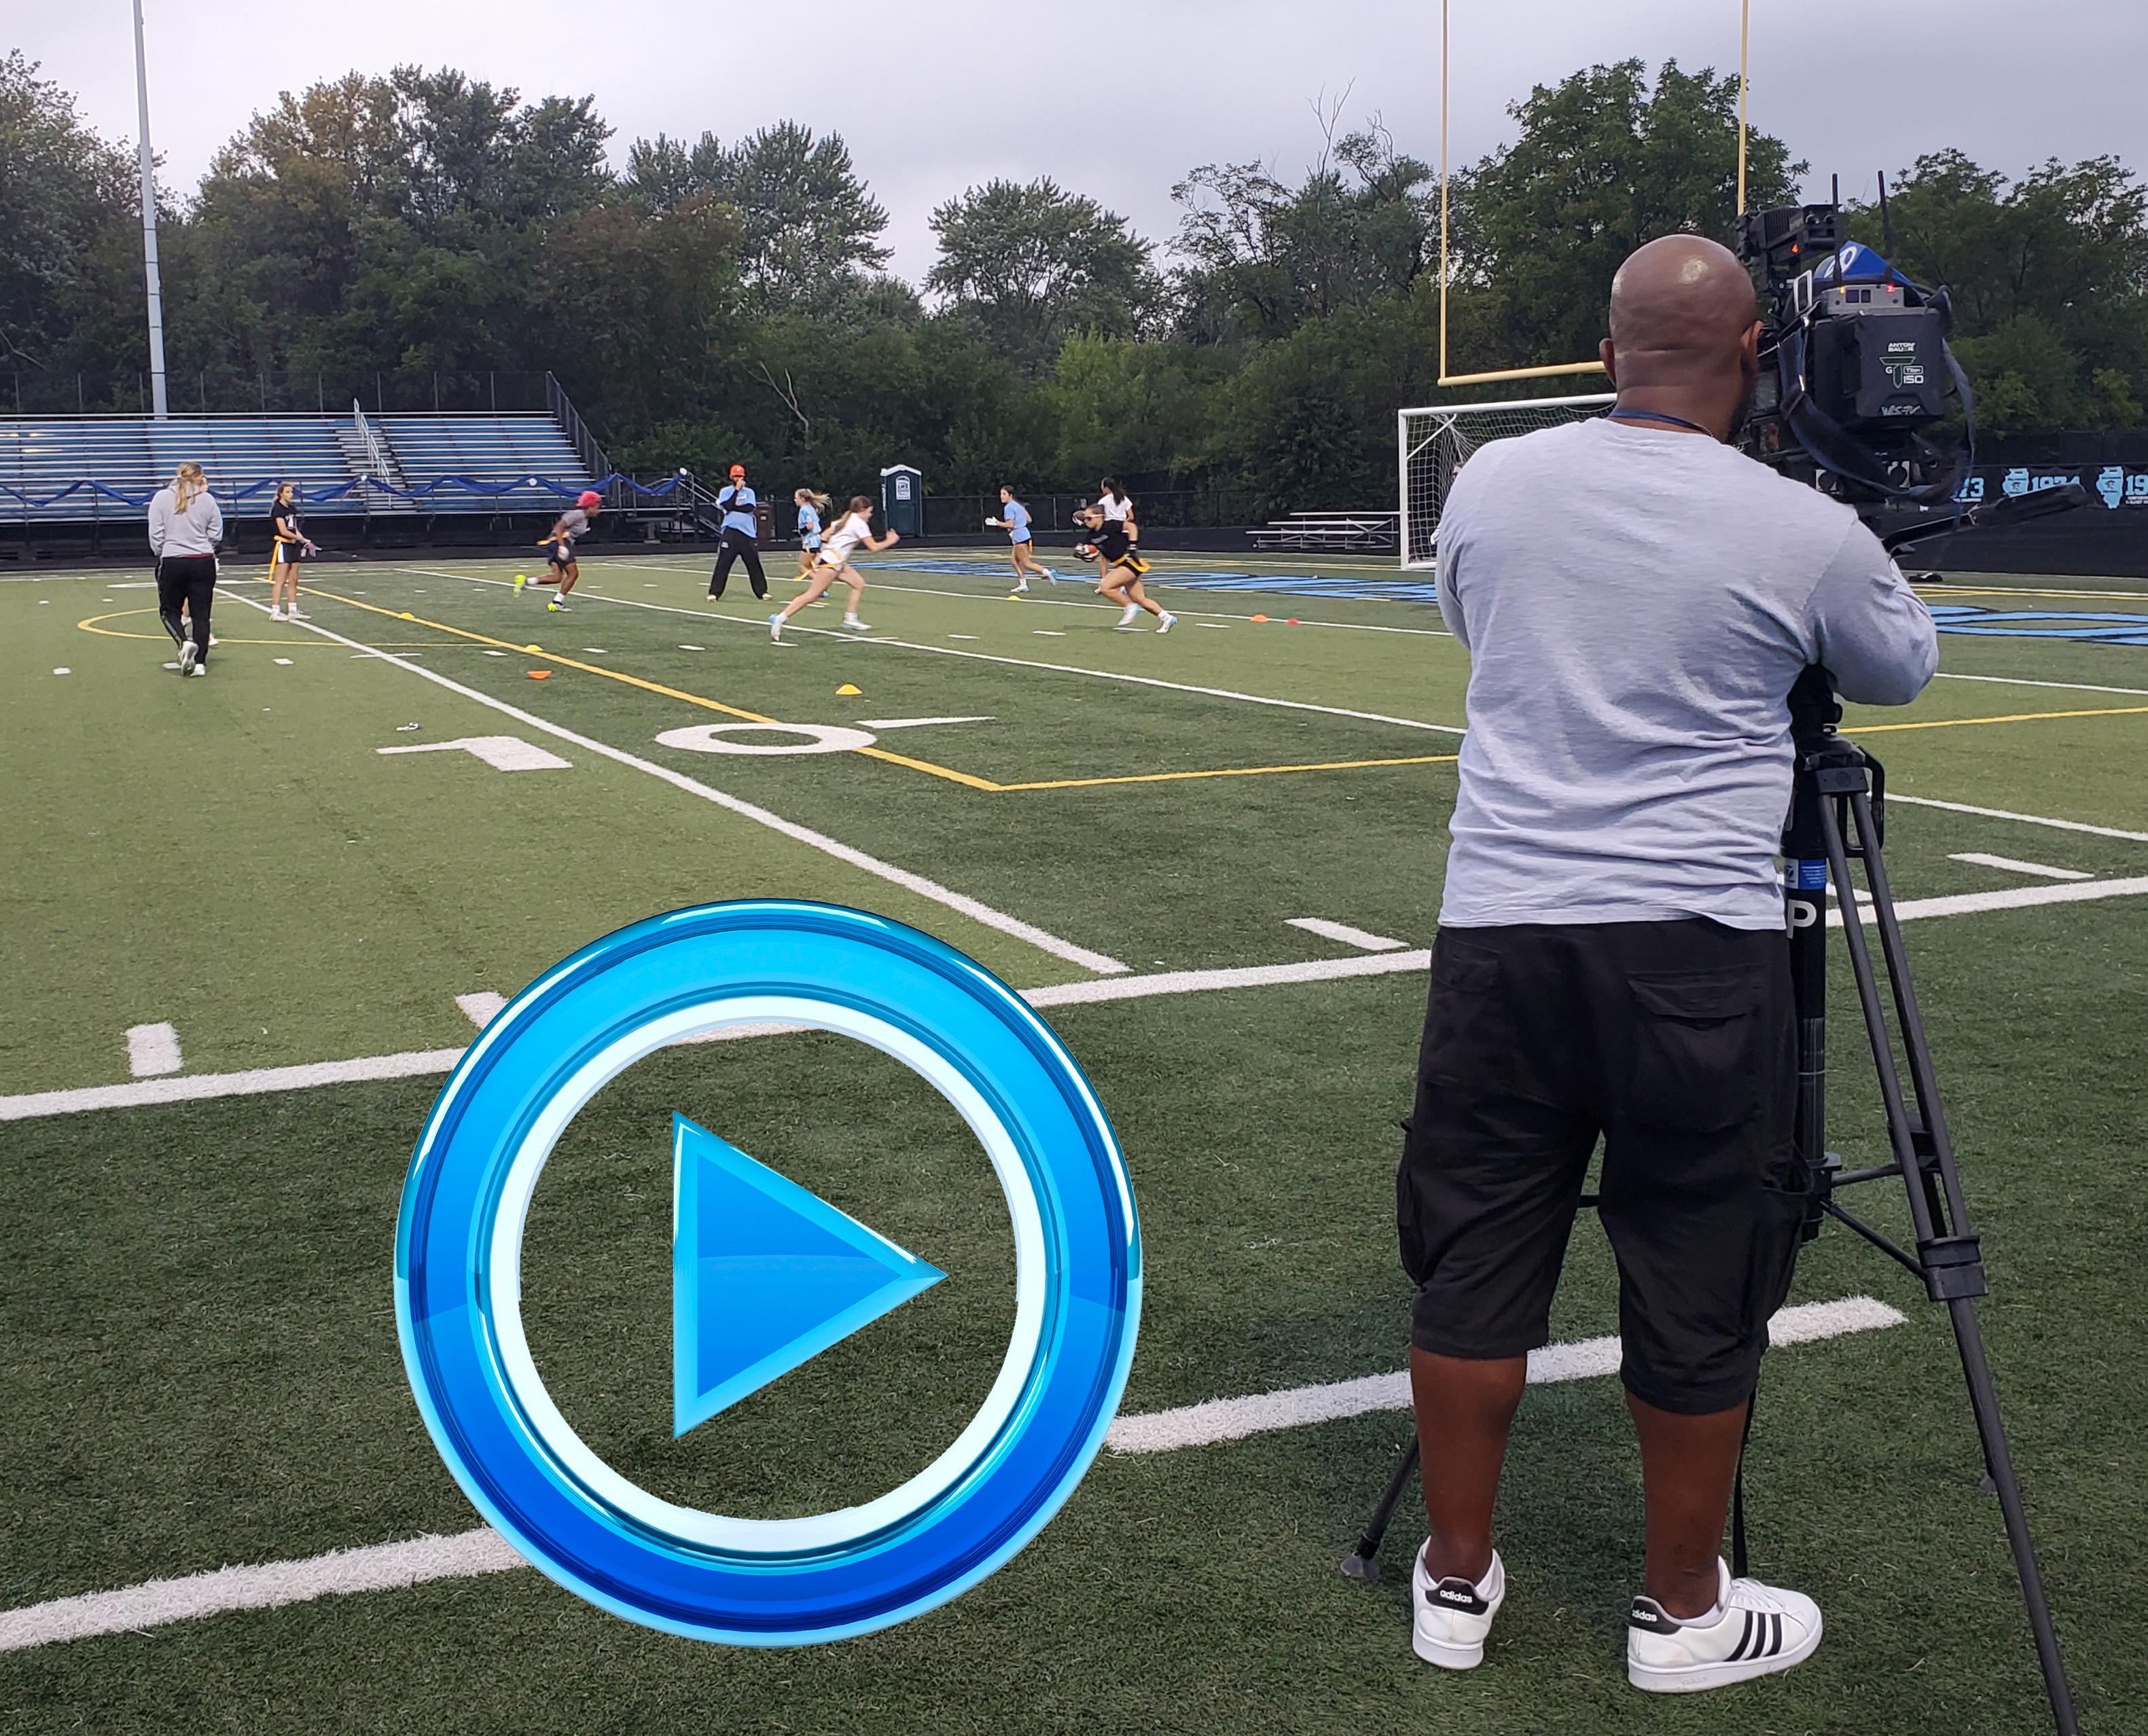 Willowbrook Flag Football Team featured on ABC7 and in Bears video, receive special message from Bears head coach